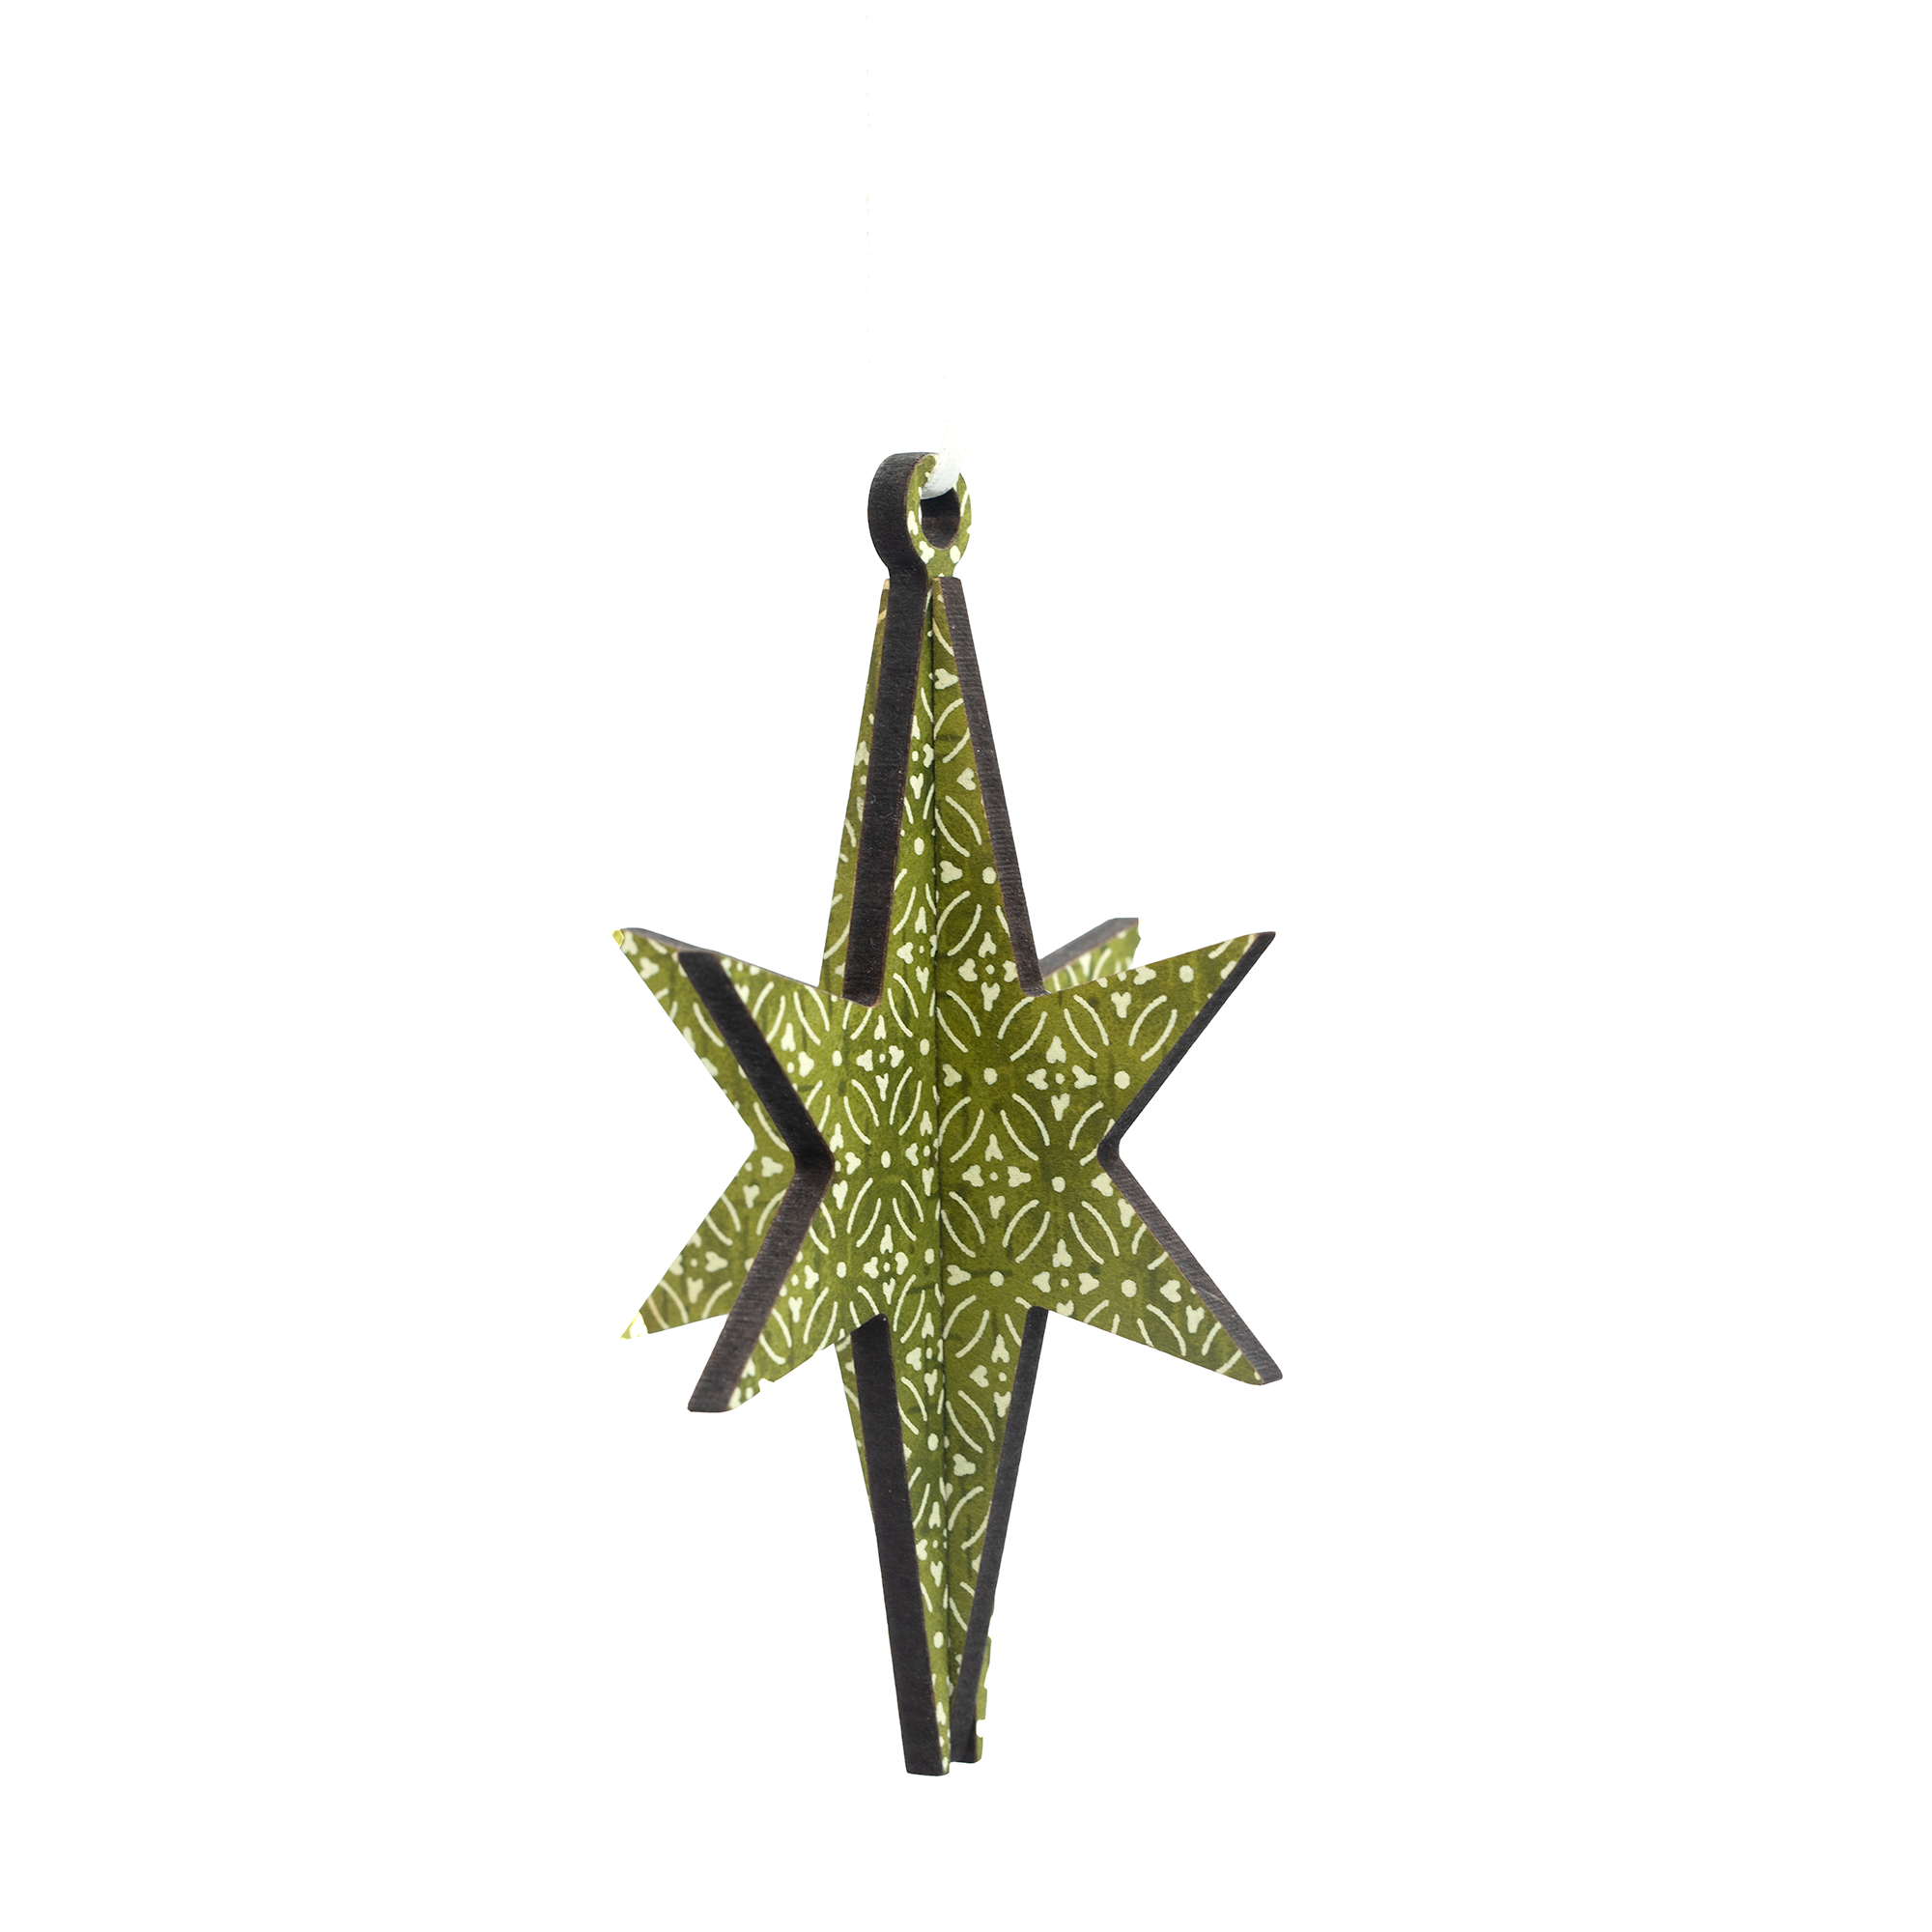 3D Star decoration in Scandi Green design, hanging against a white background